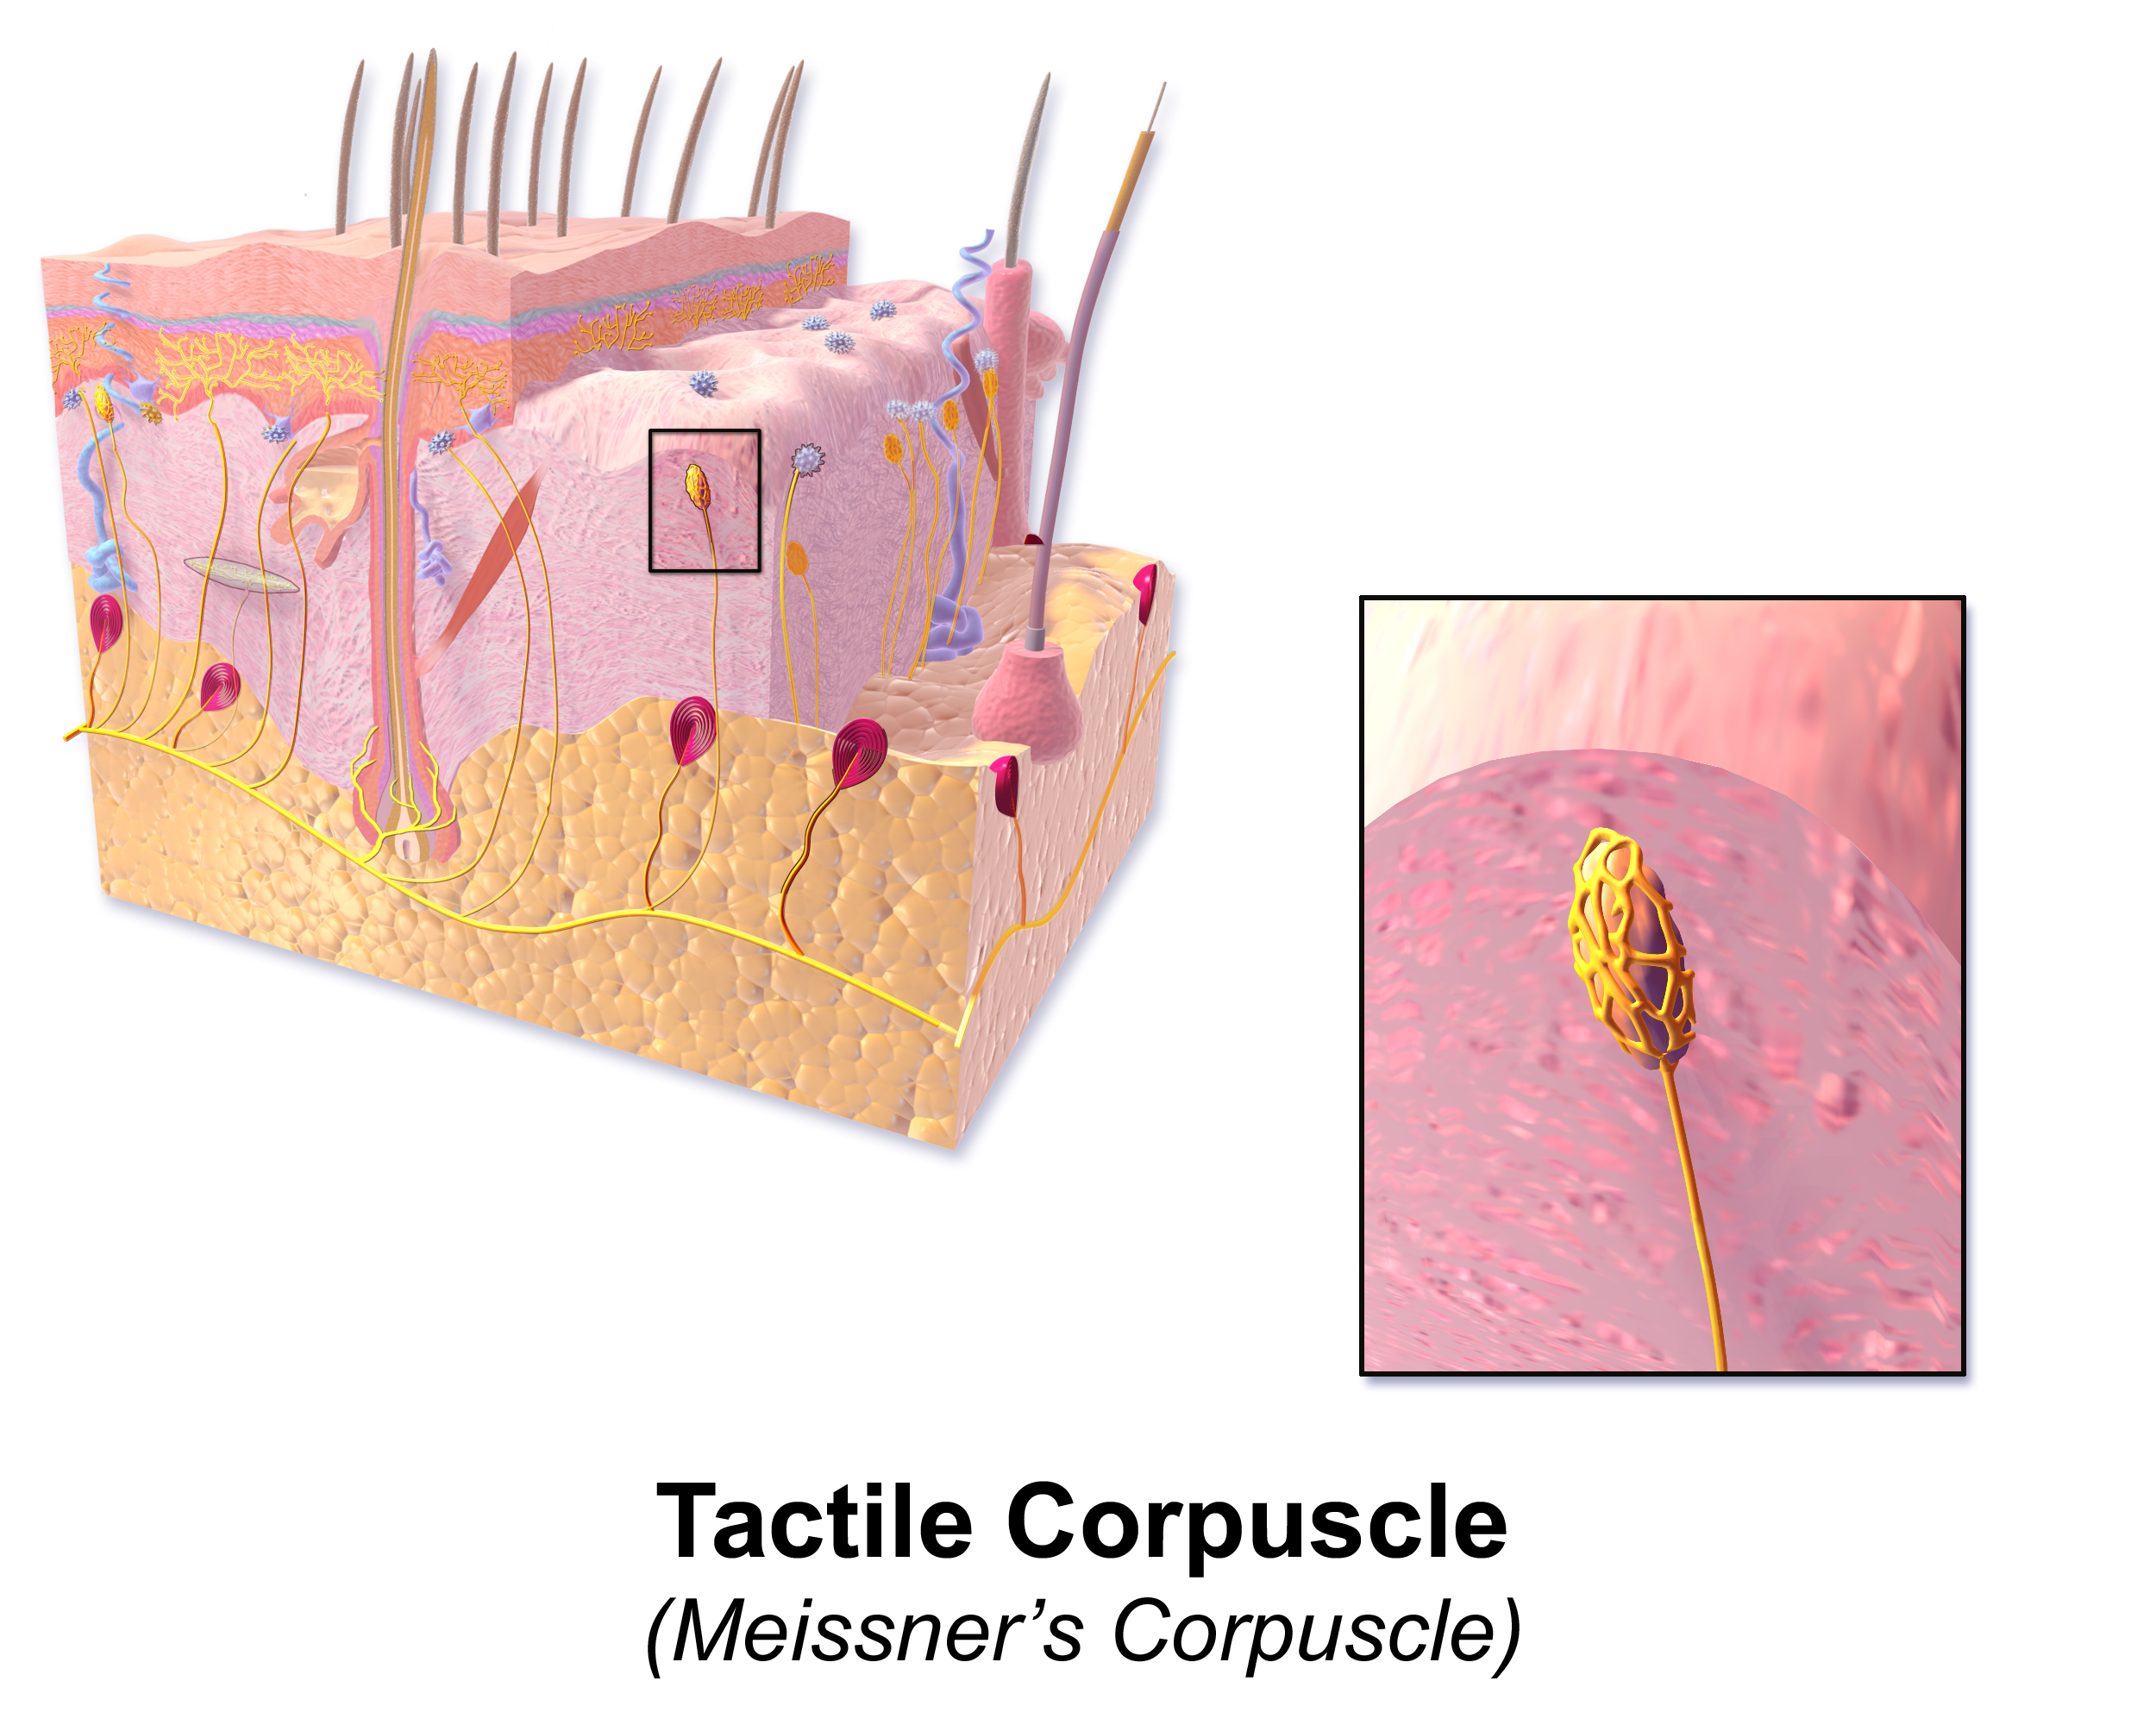 Tactile Corpuscle